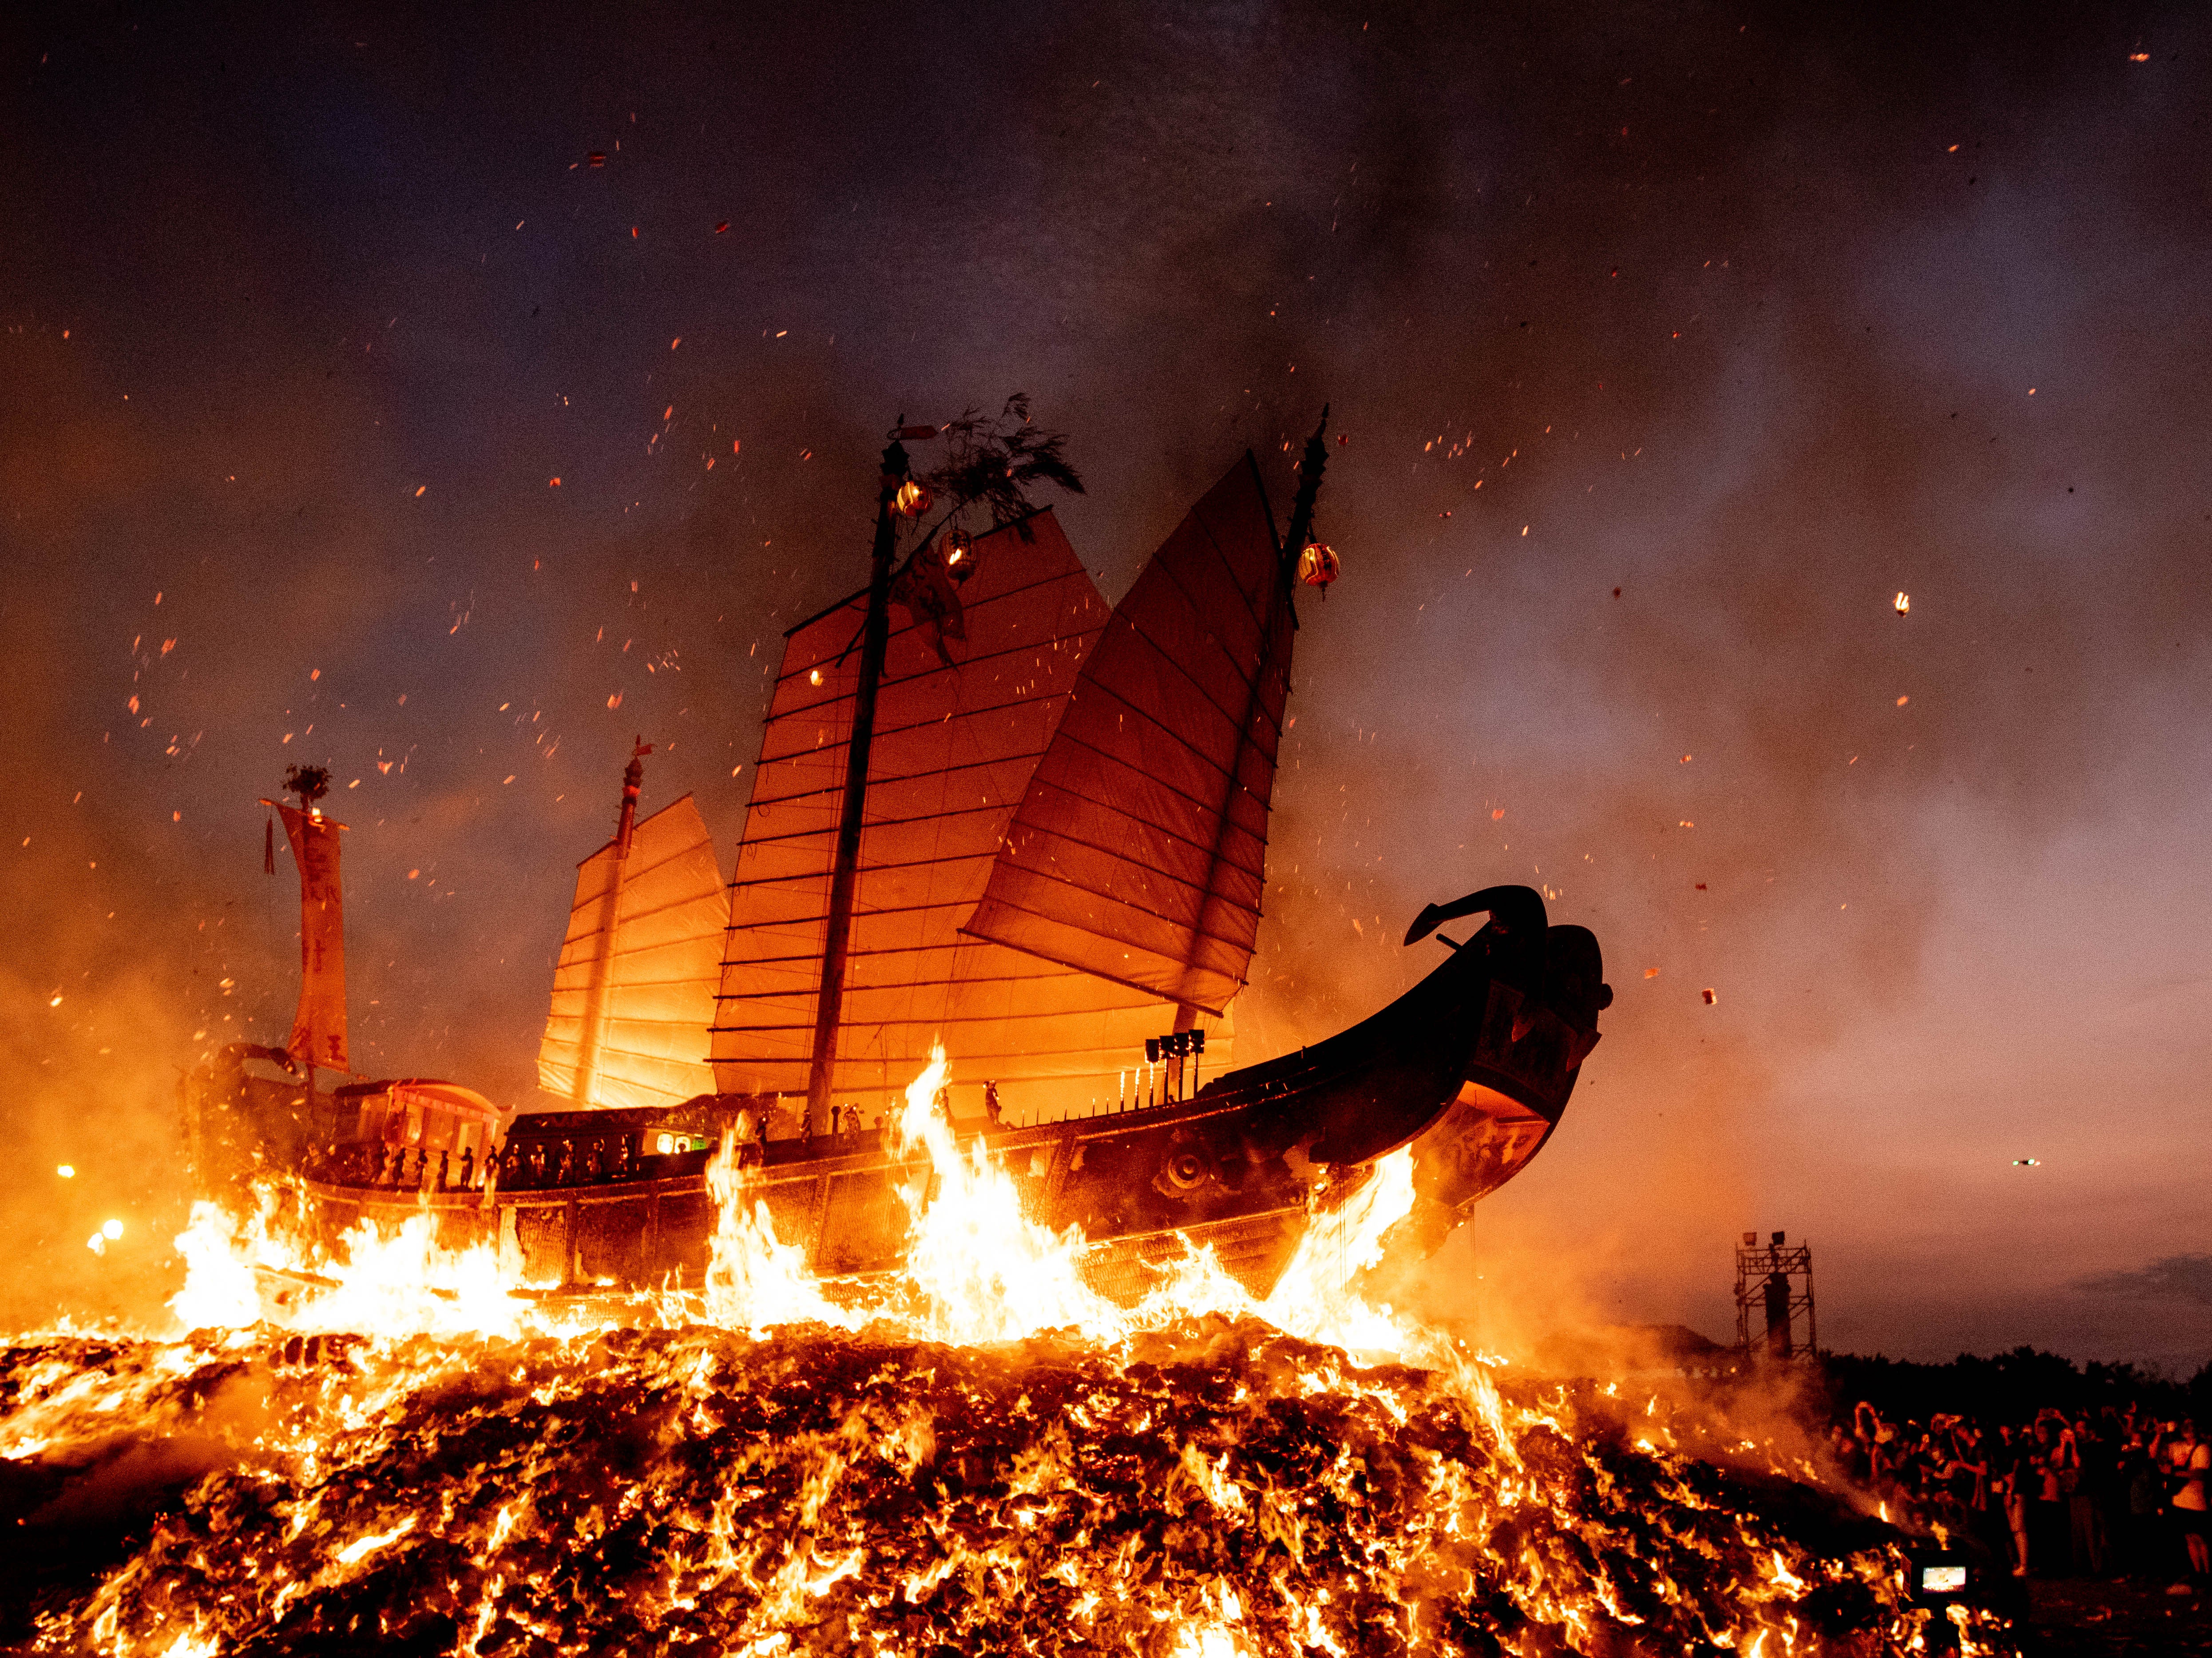 The Wang Ye boat is engulfed in flames on a beach in Donggang, southern Taiwan